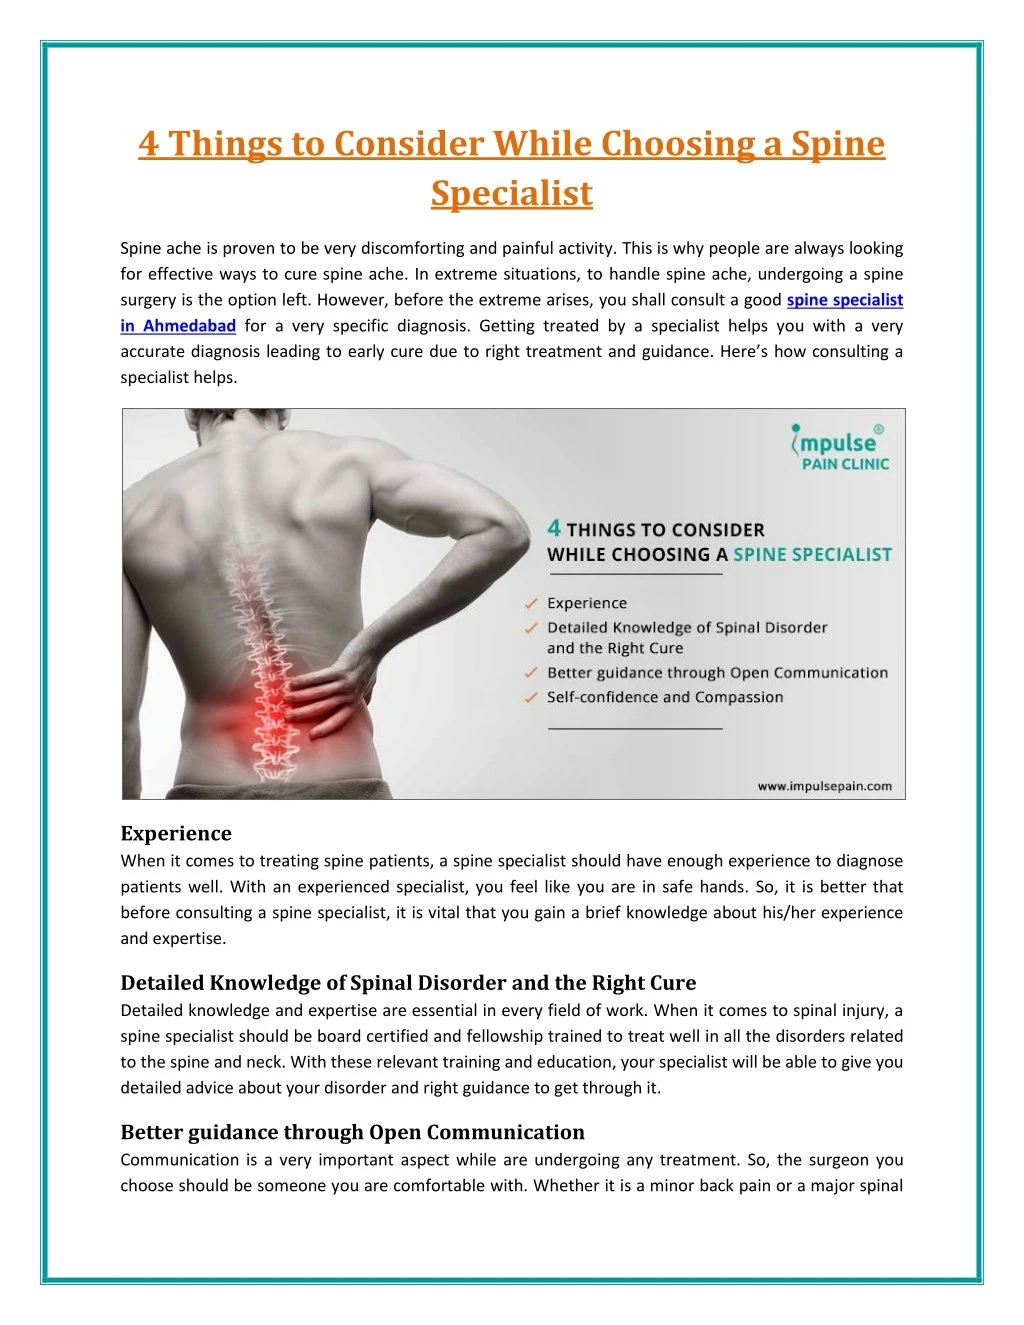 4 things to consider while choosing a spine